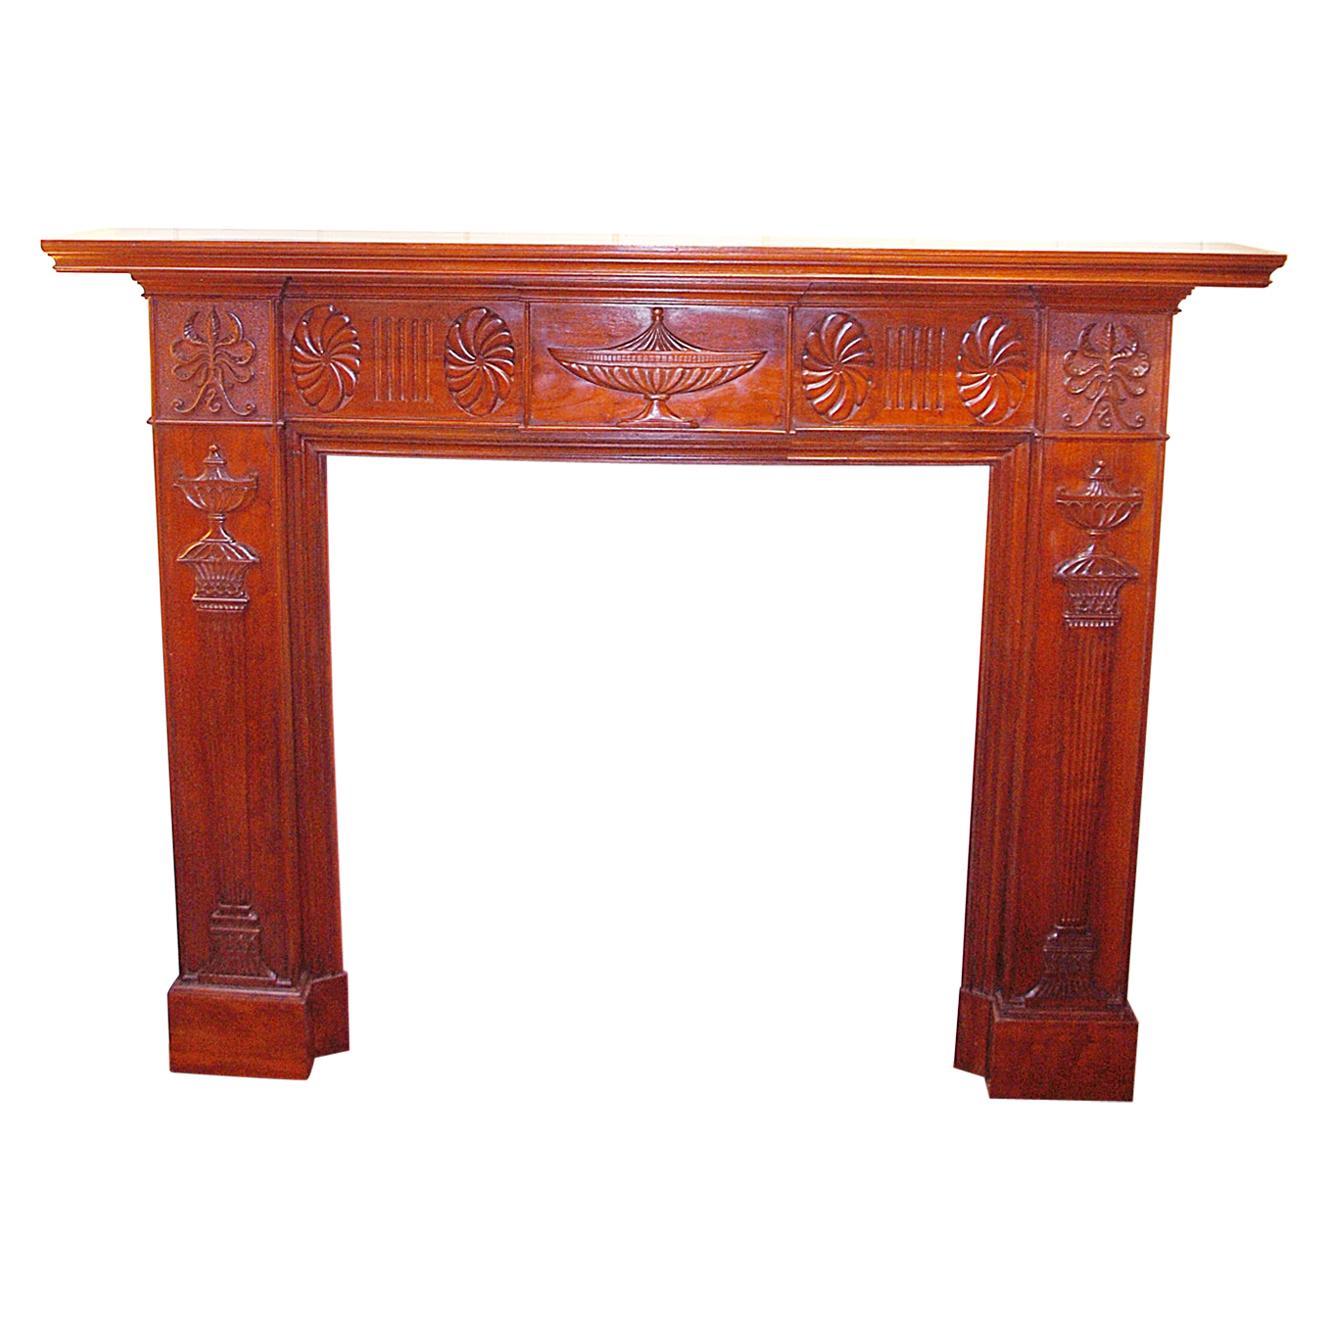 English 19th Century Adam Style Carved Mahogany Fireplace Surround and Mantel For Sale